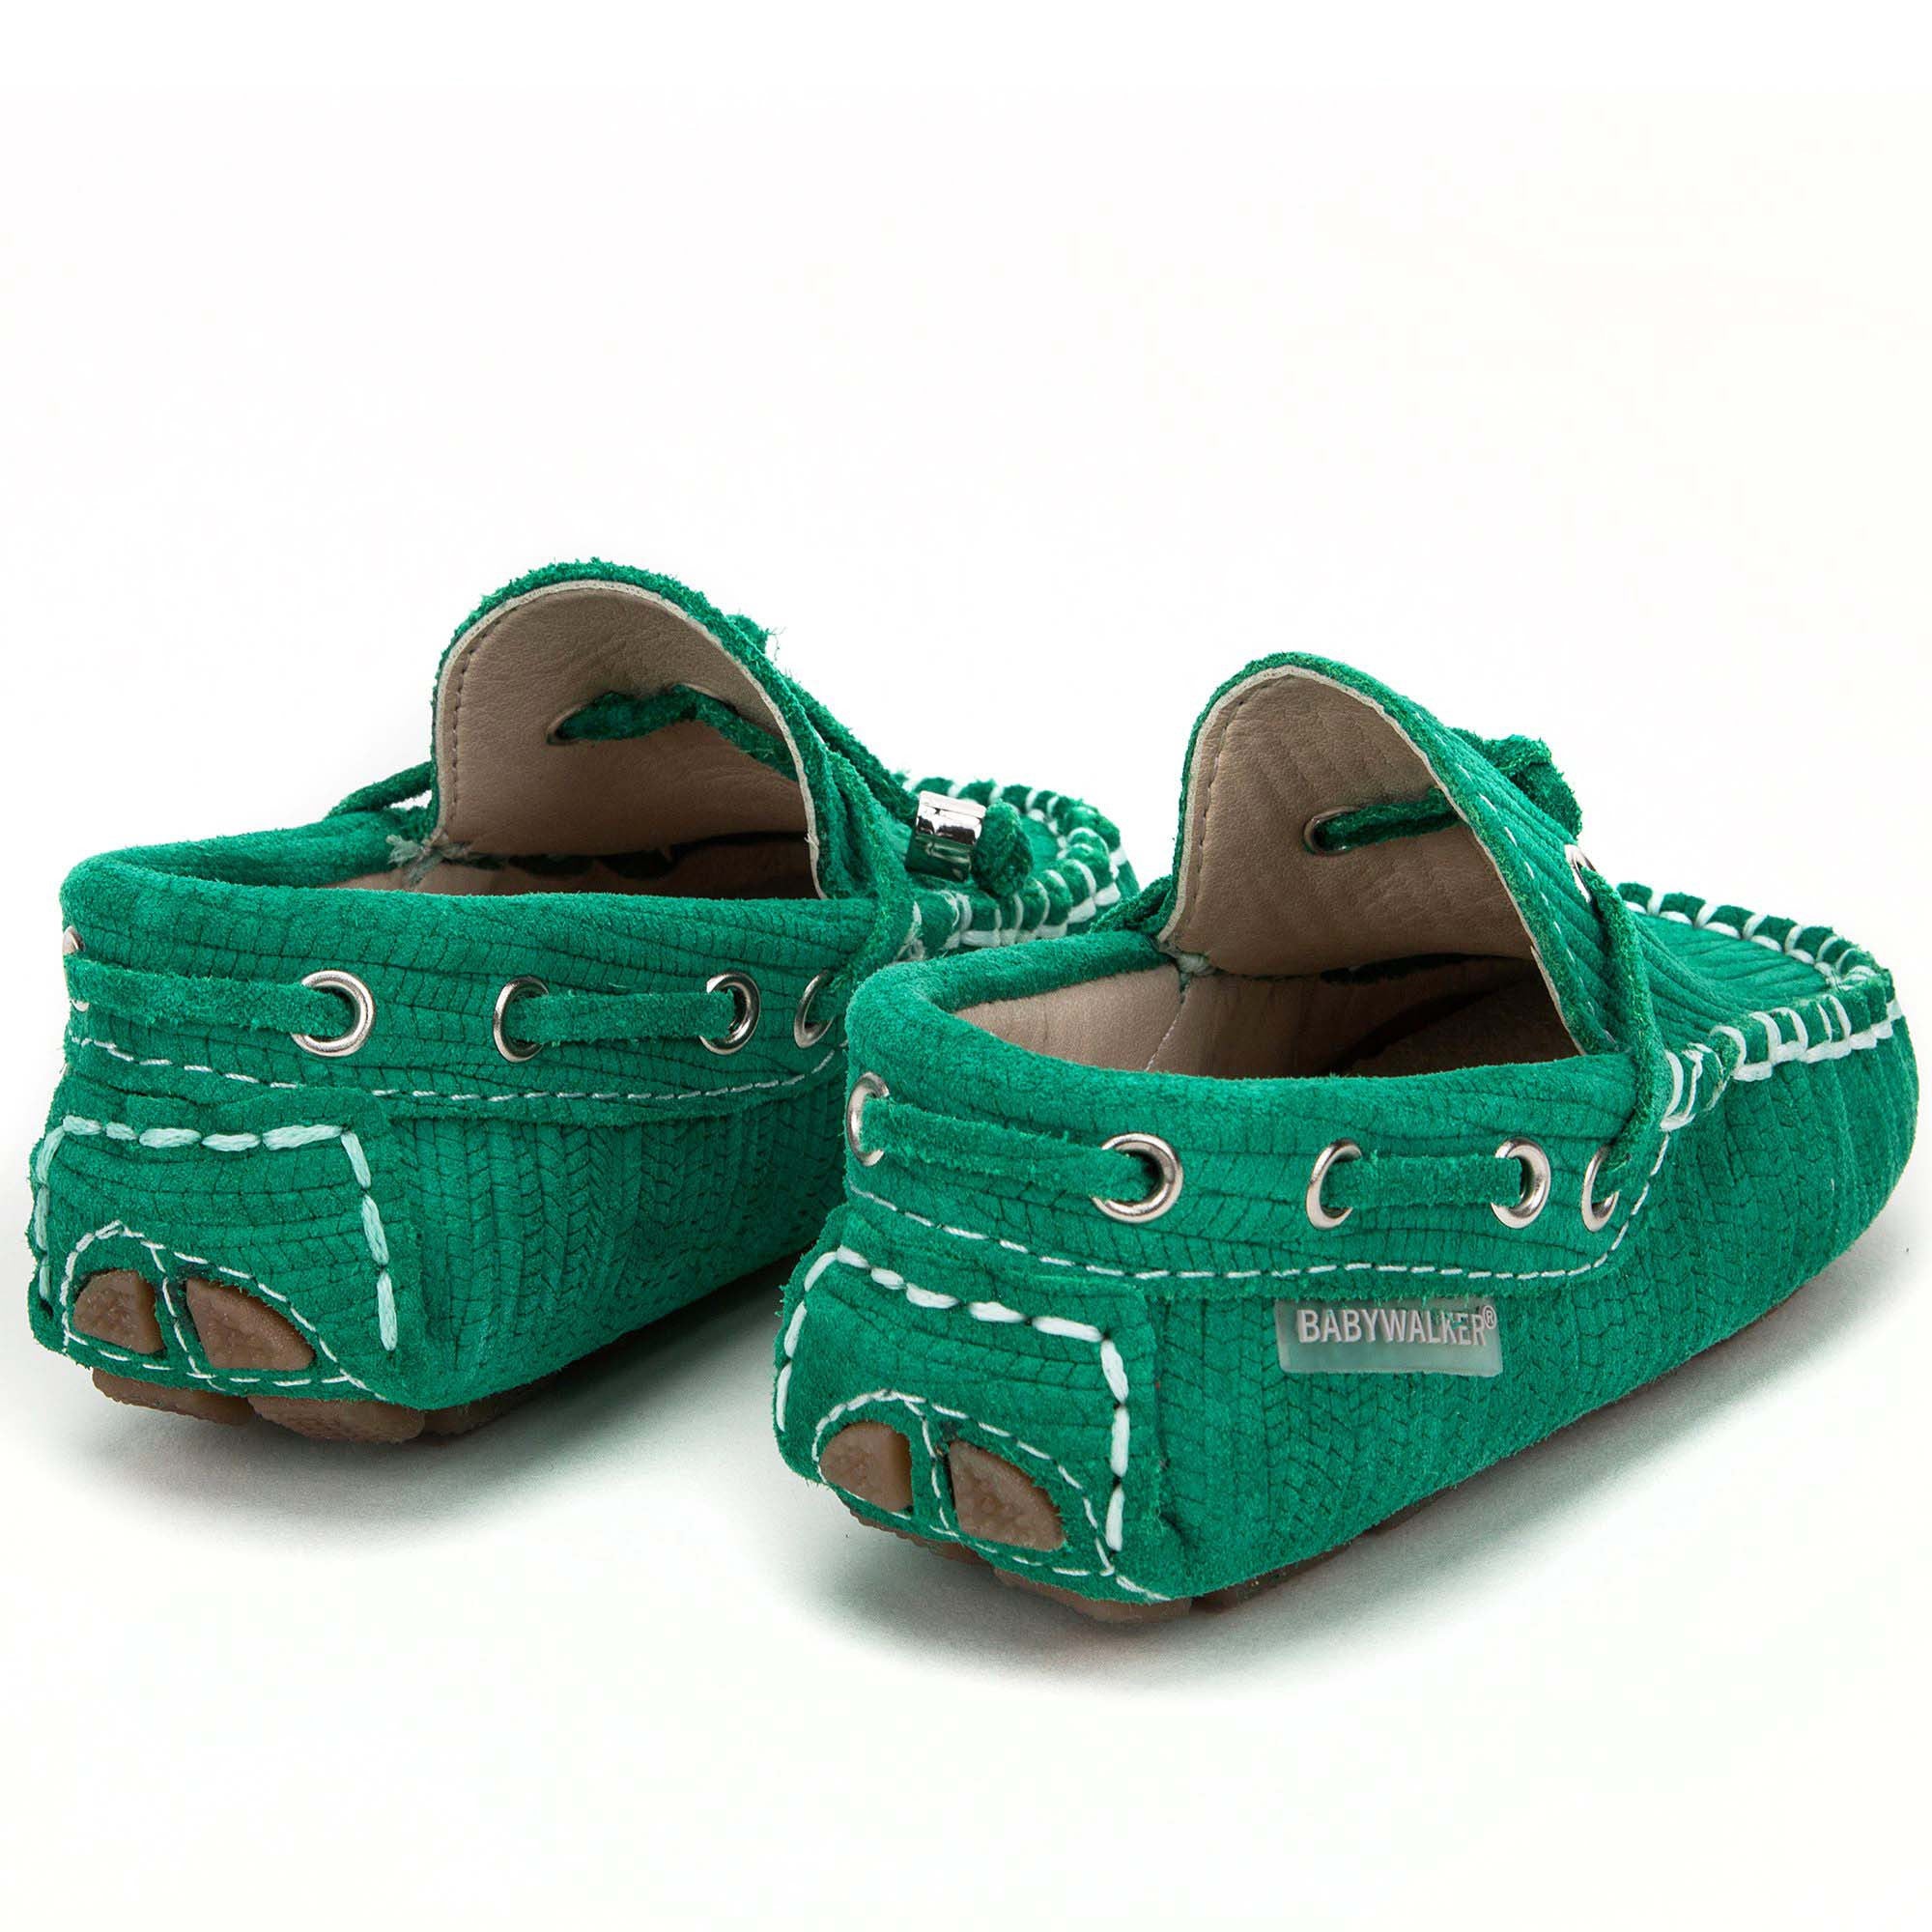 Boys & Girls Green Suede Leather Tasselled Loafers